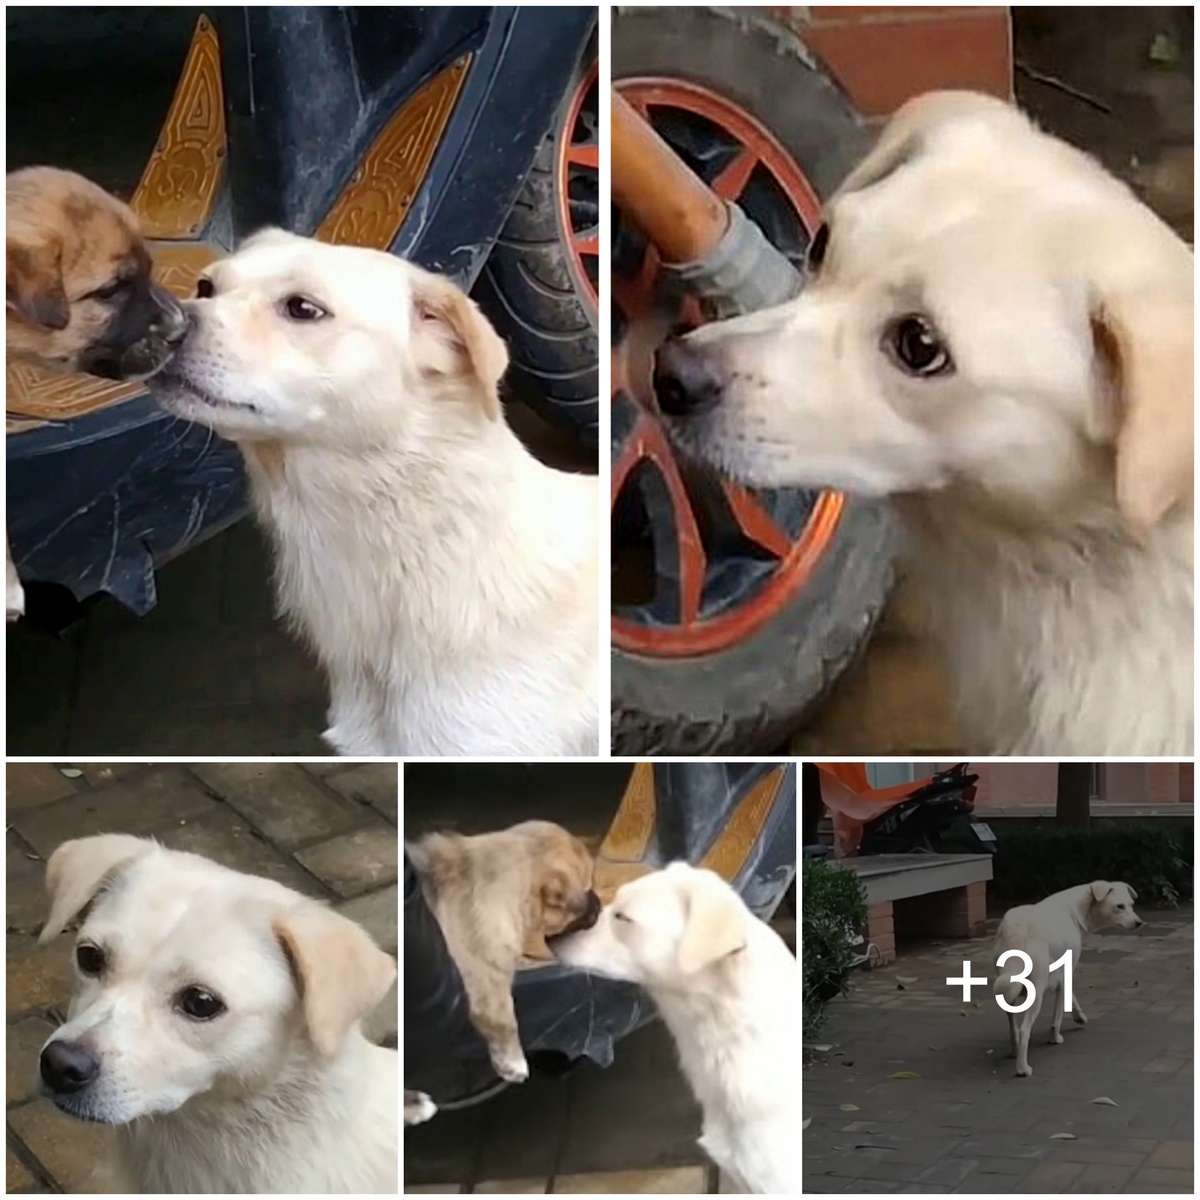 Heartfelt Goodbye: A Mother Dog Bids a Regretful Farewell to Her Puppy as the Owner Decides to Sell Due to Financial Constraints, Expressing a Wish for the Pup’s Happiness.